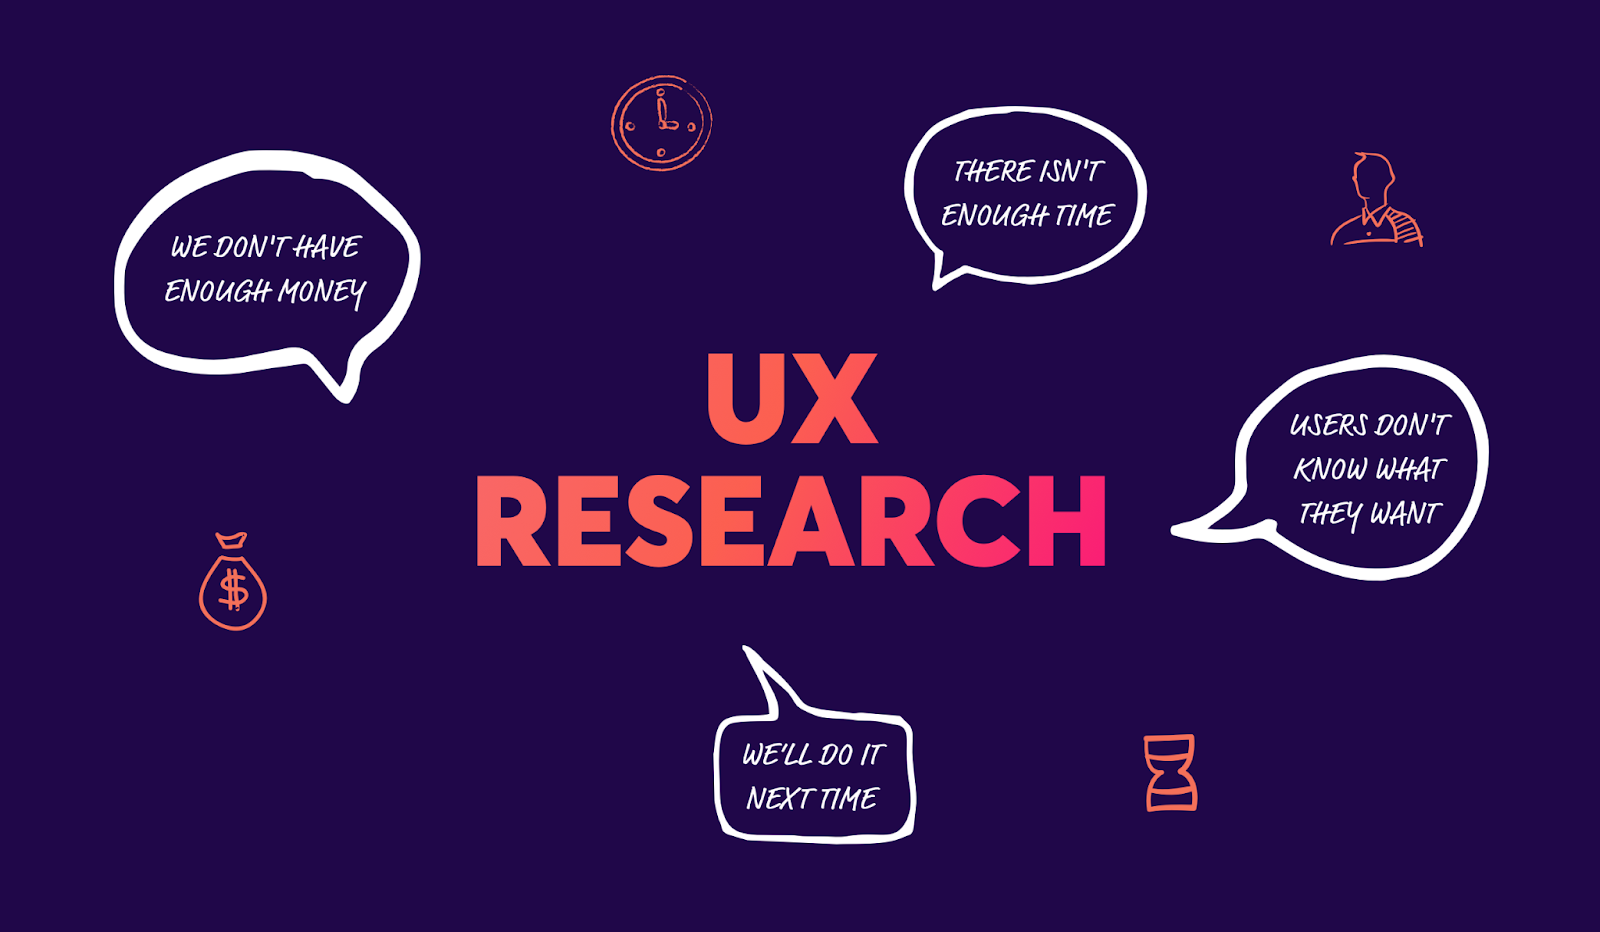 How to Sell UX Research?